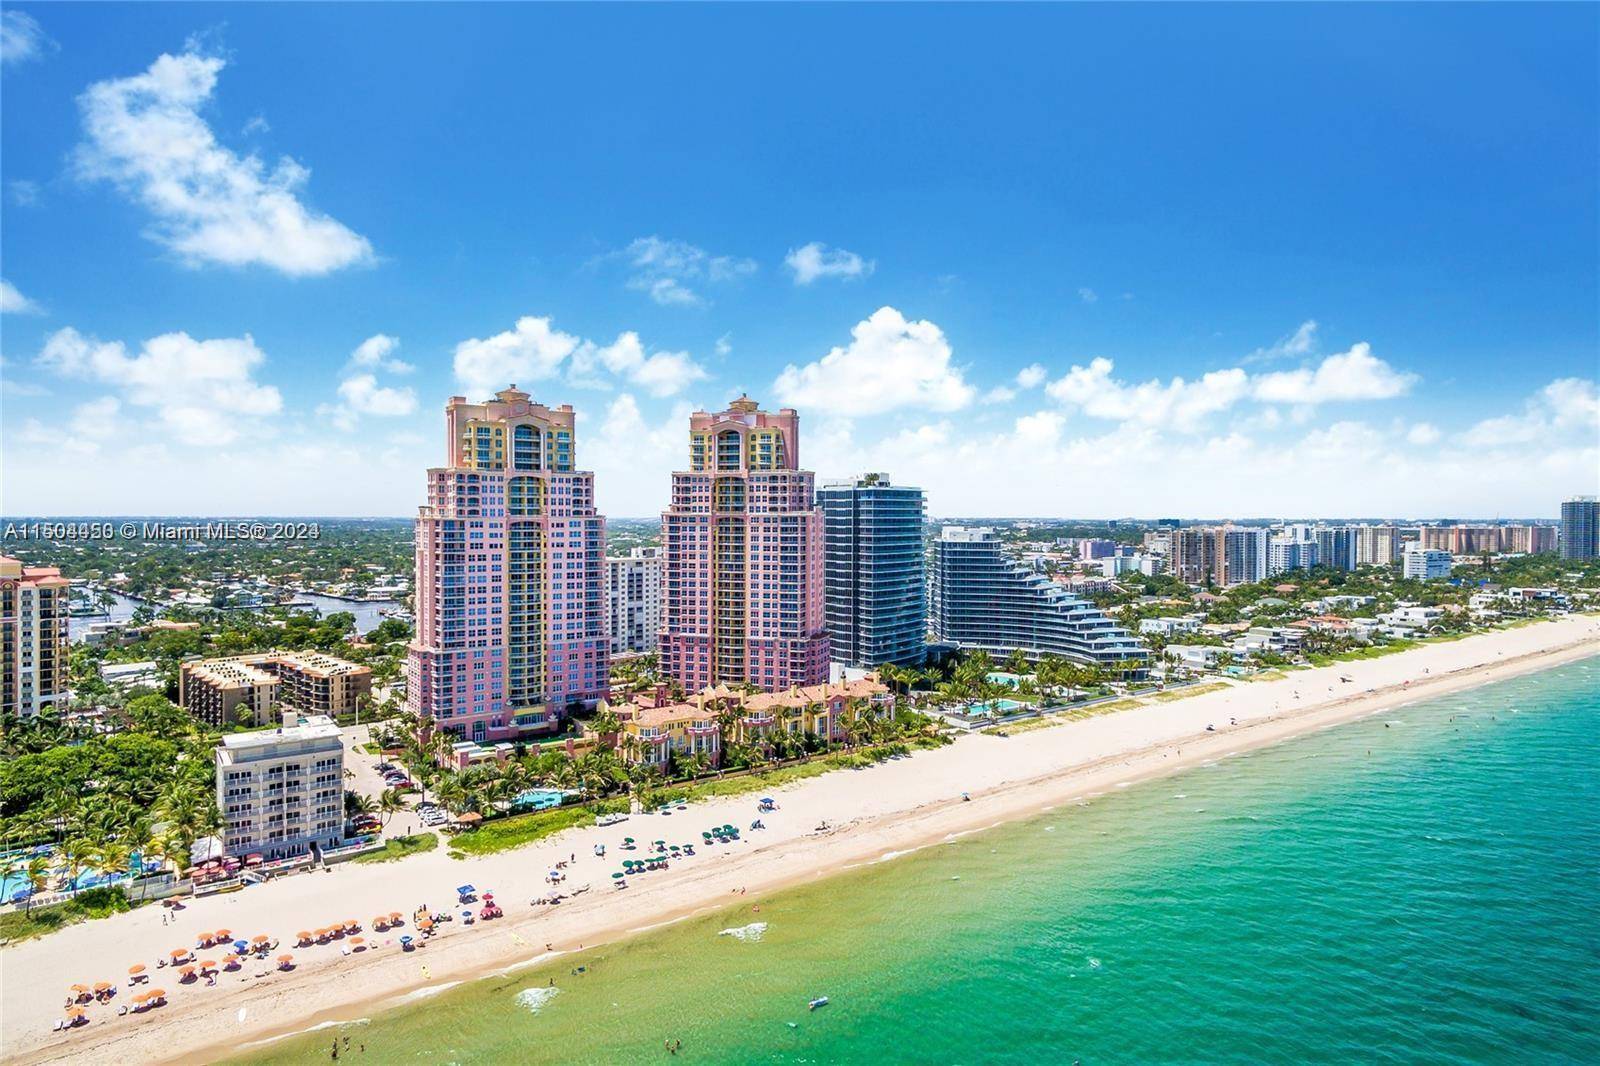 Highly desirable Florence model at The Palms II offers some of the best views in South Florida.